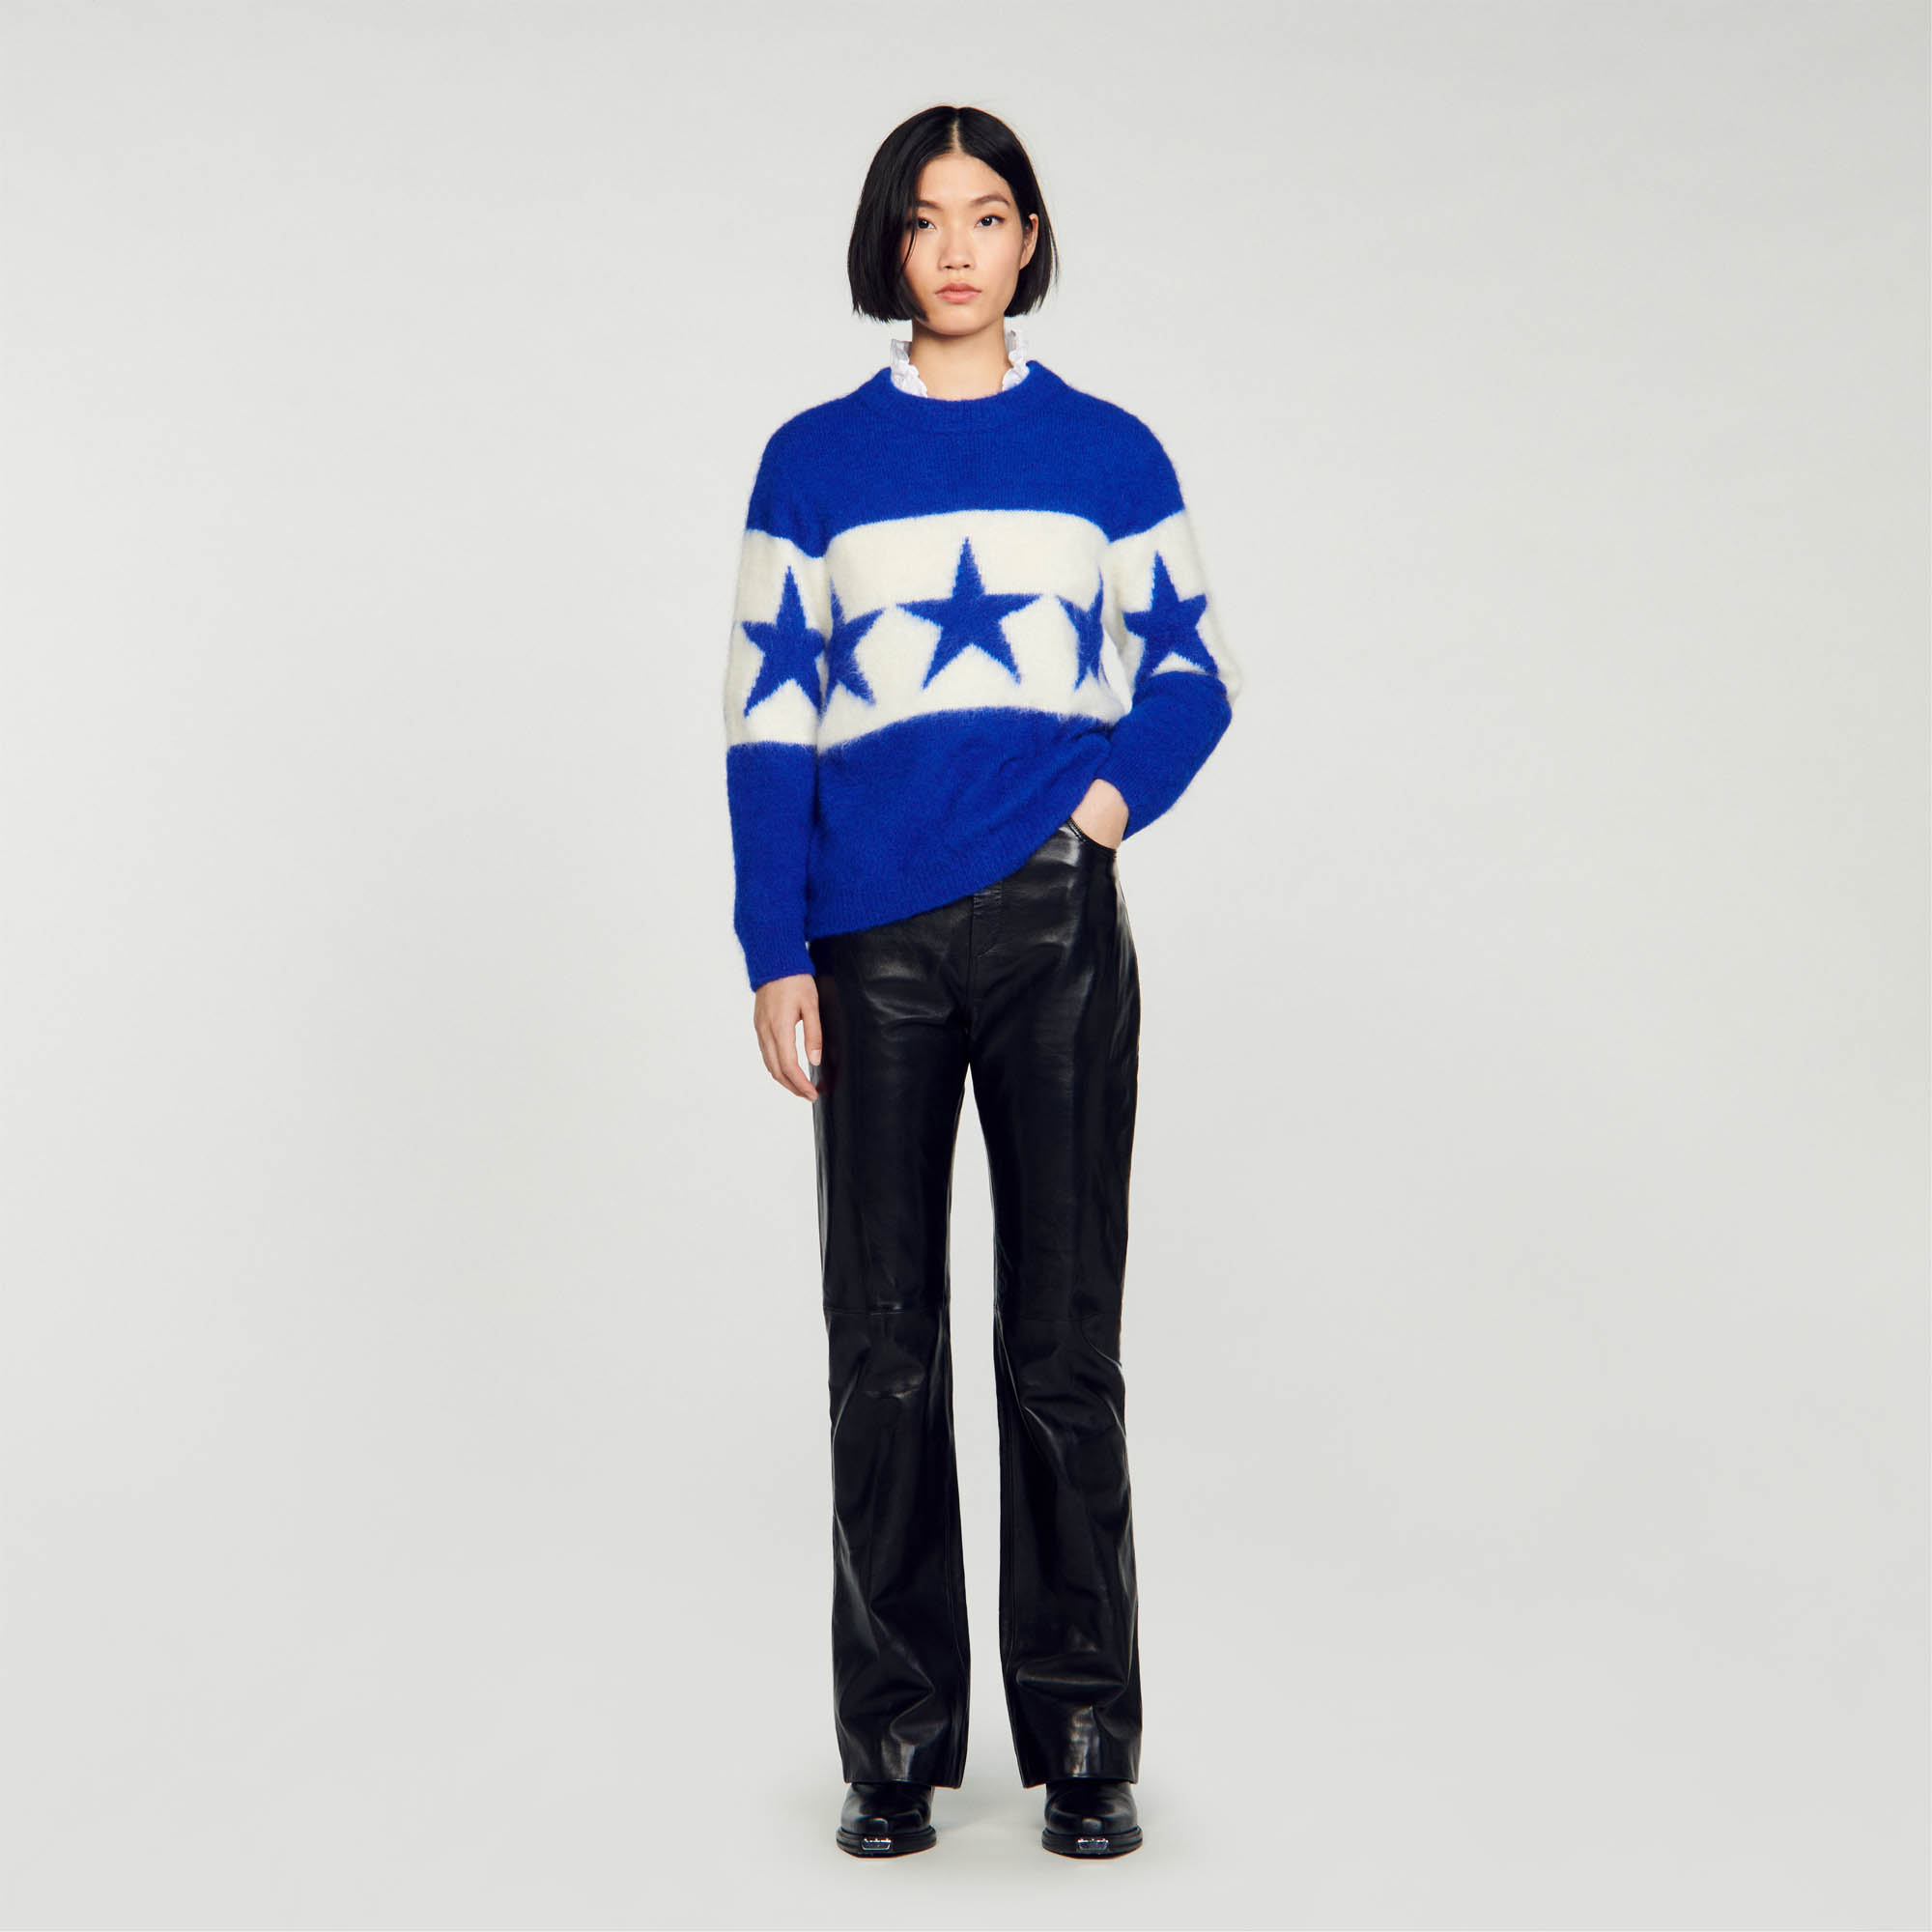 Sandro polyamide Oversized fluffy knit with round neck and long sleeves, embellished with a contrasting stripe with star motifs